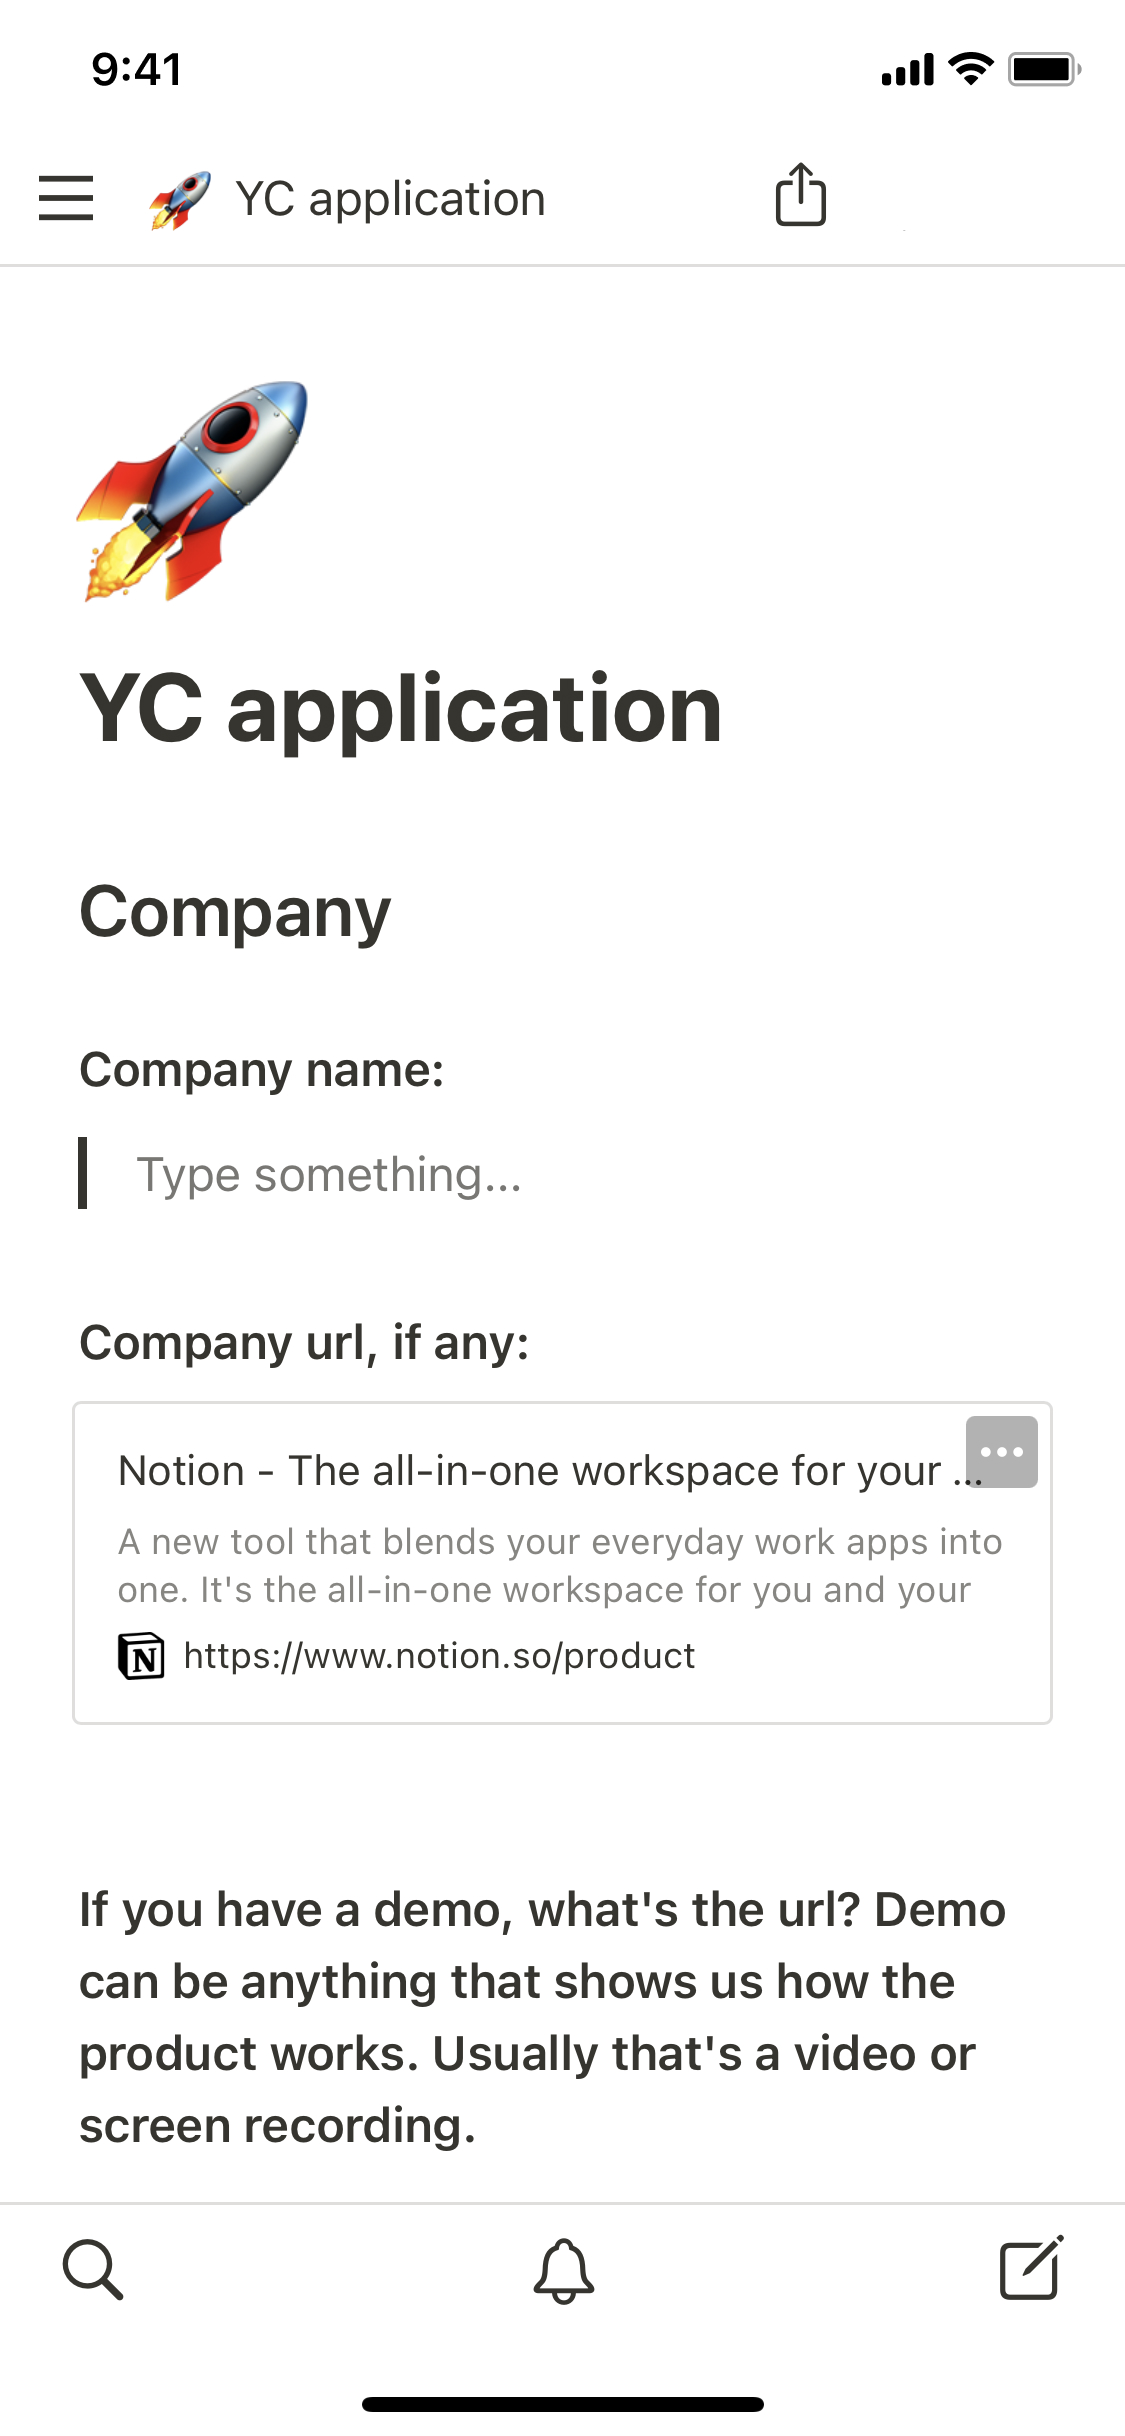 The mobile image for the YC application template